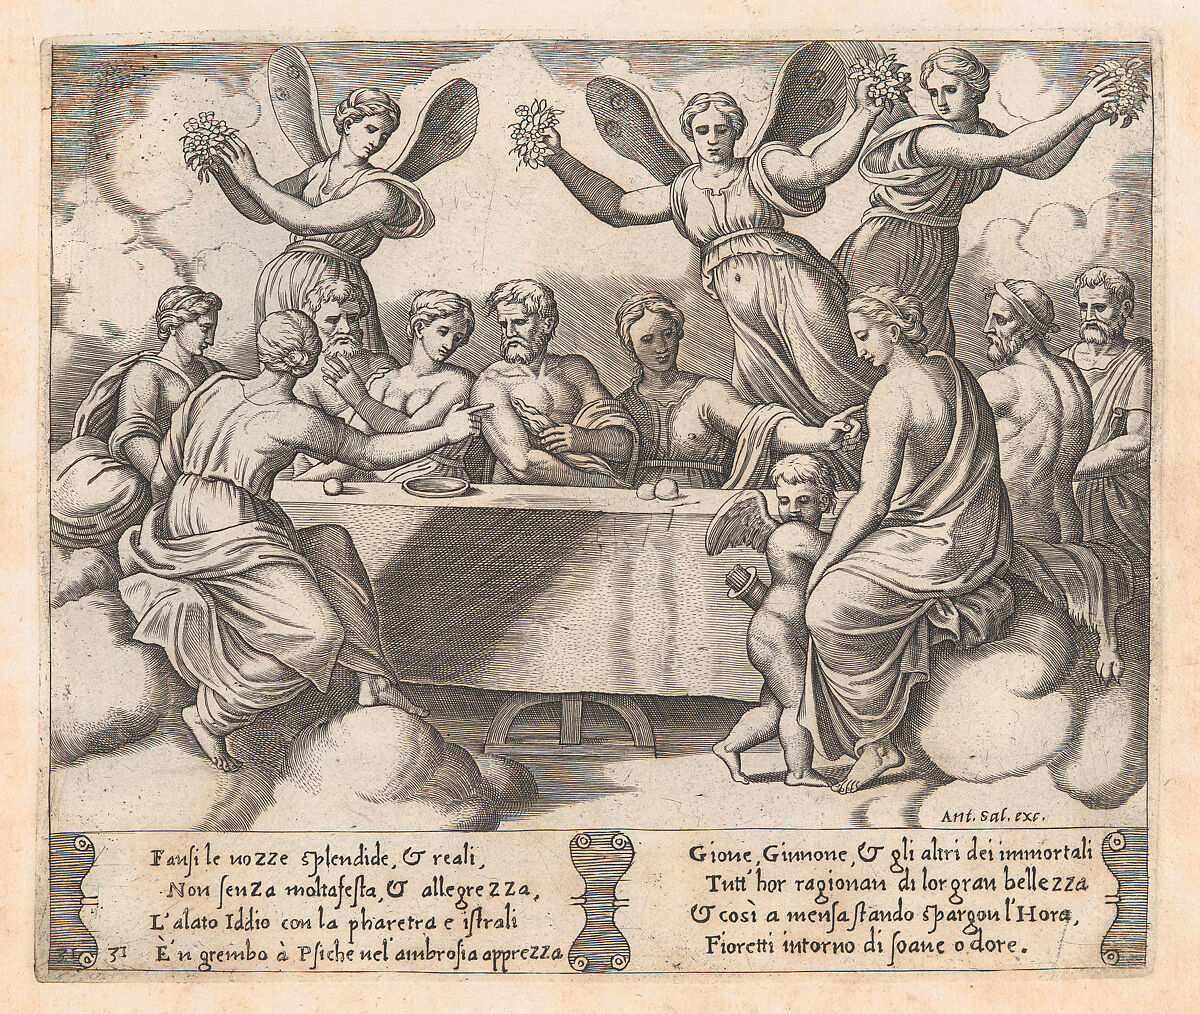 Plate 31: Gods celebrating the wedding of Cupid and Psyche, from "The Story of Cupid and Psyche as told by Apuleius", Master of the Die (Italian, active Rome, ca. 1530–60), Engraving 